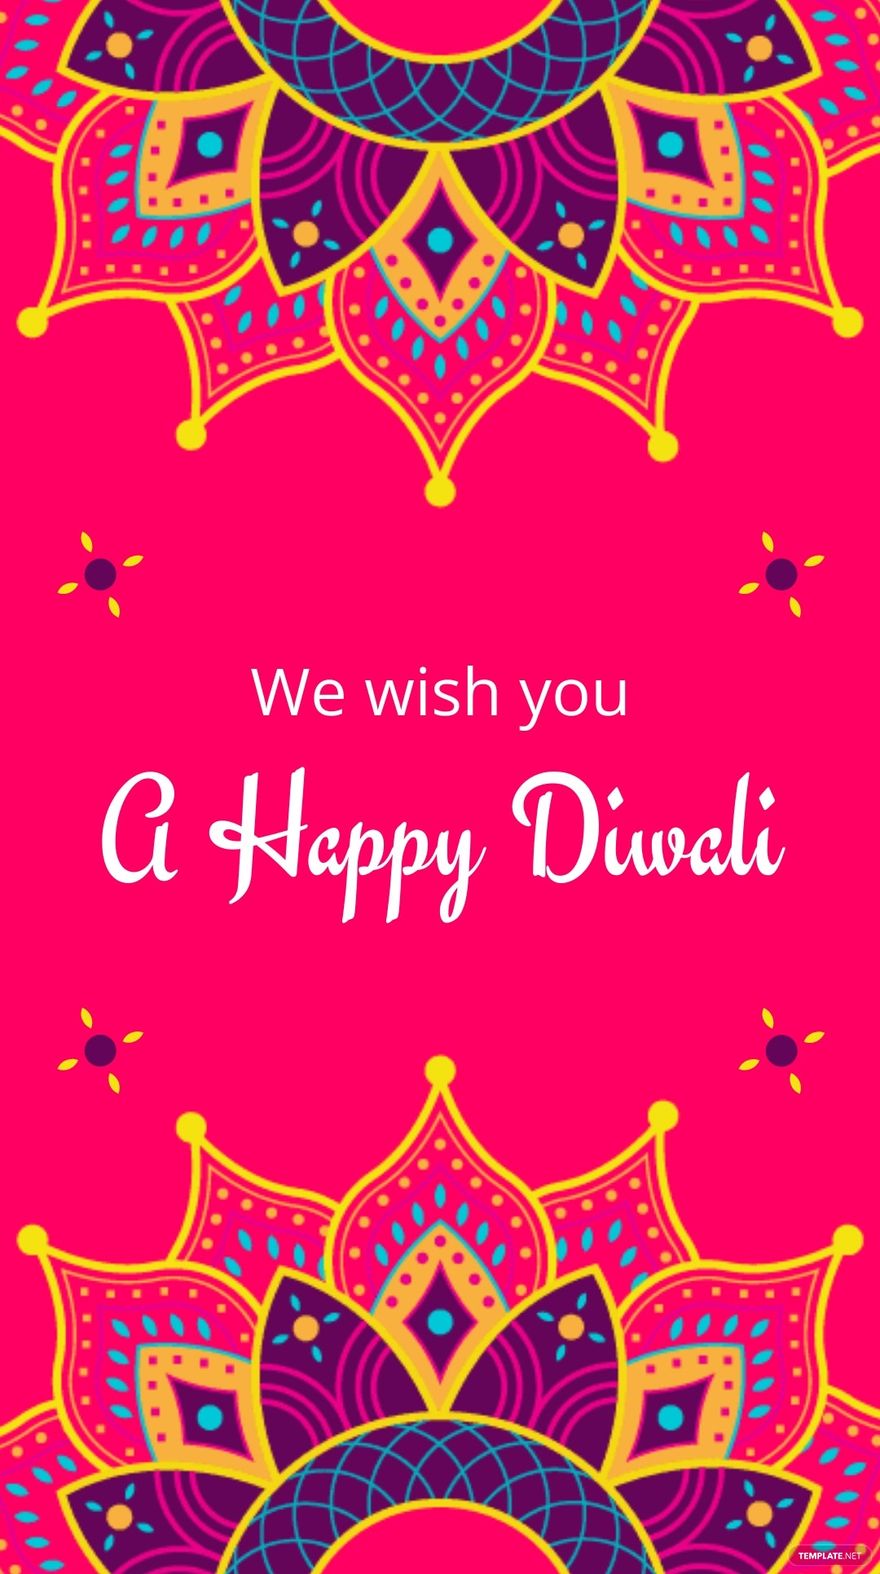 Free Colorful Diwali Wishes Whatsapp Post Template